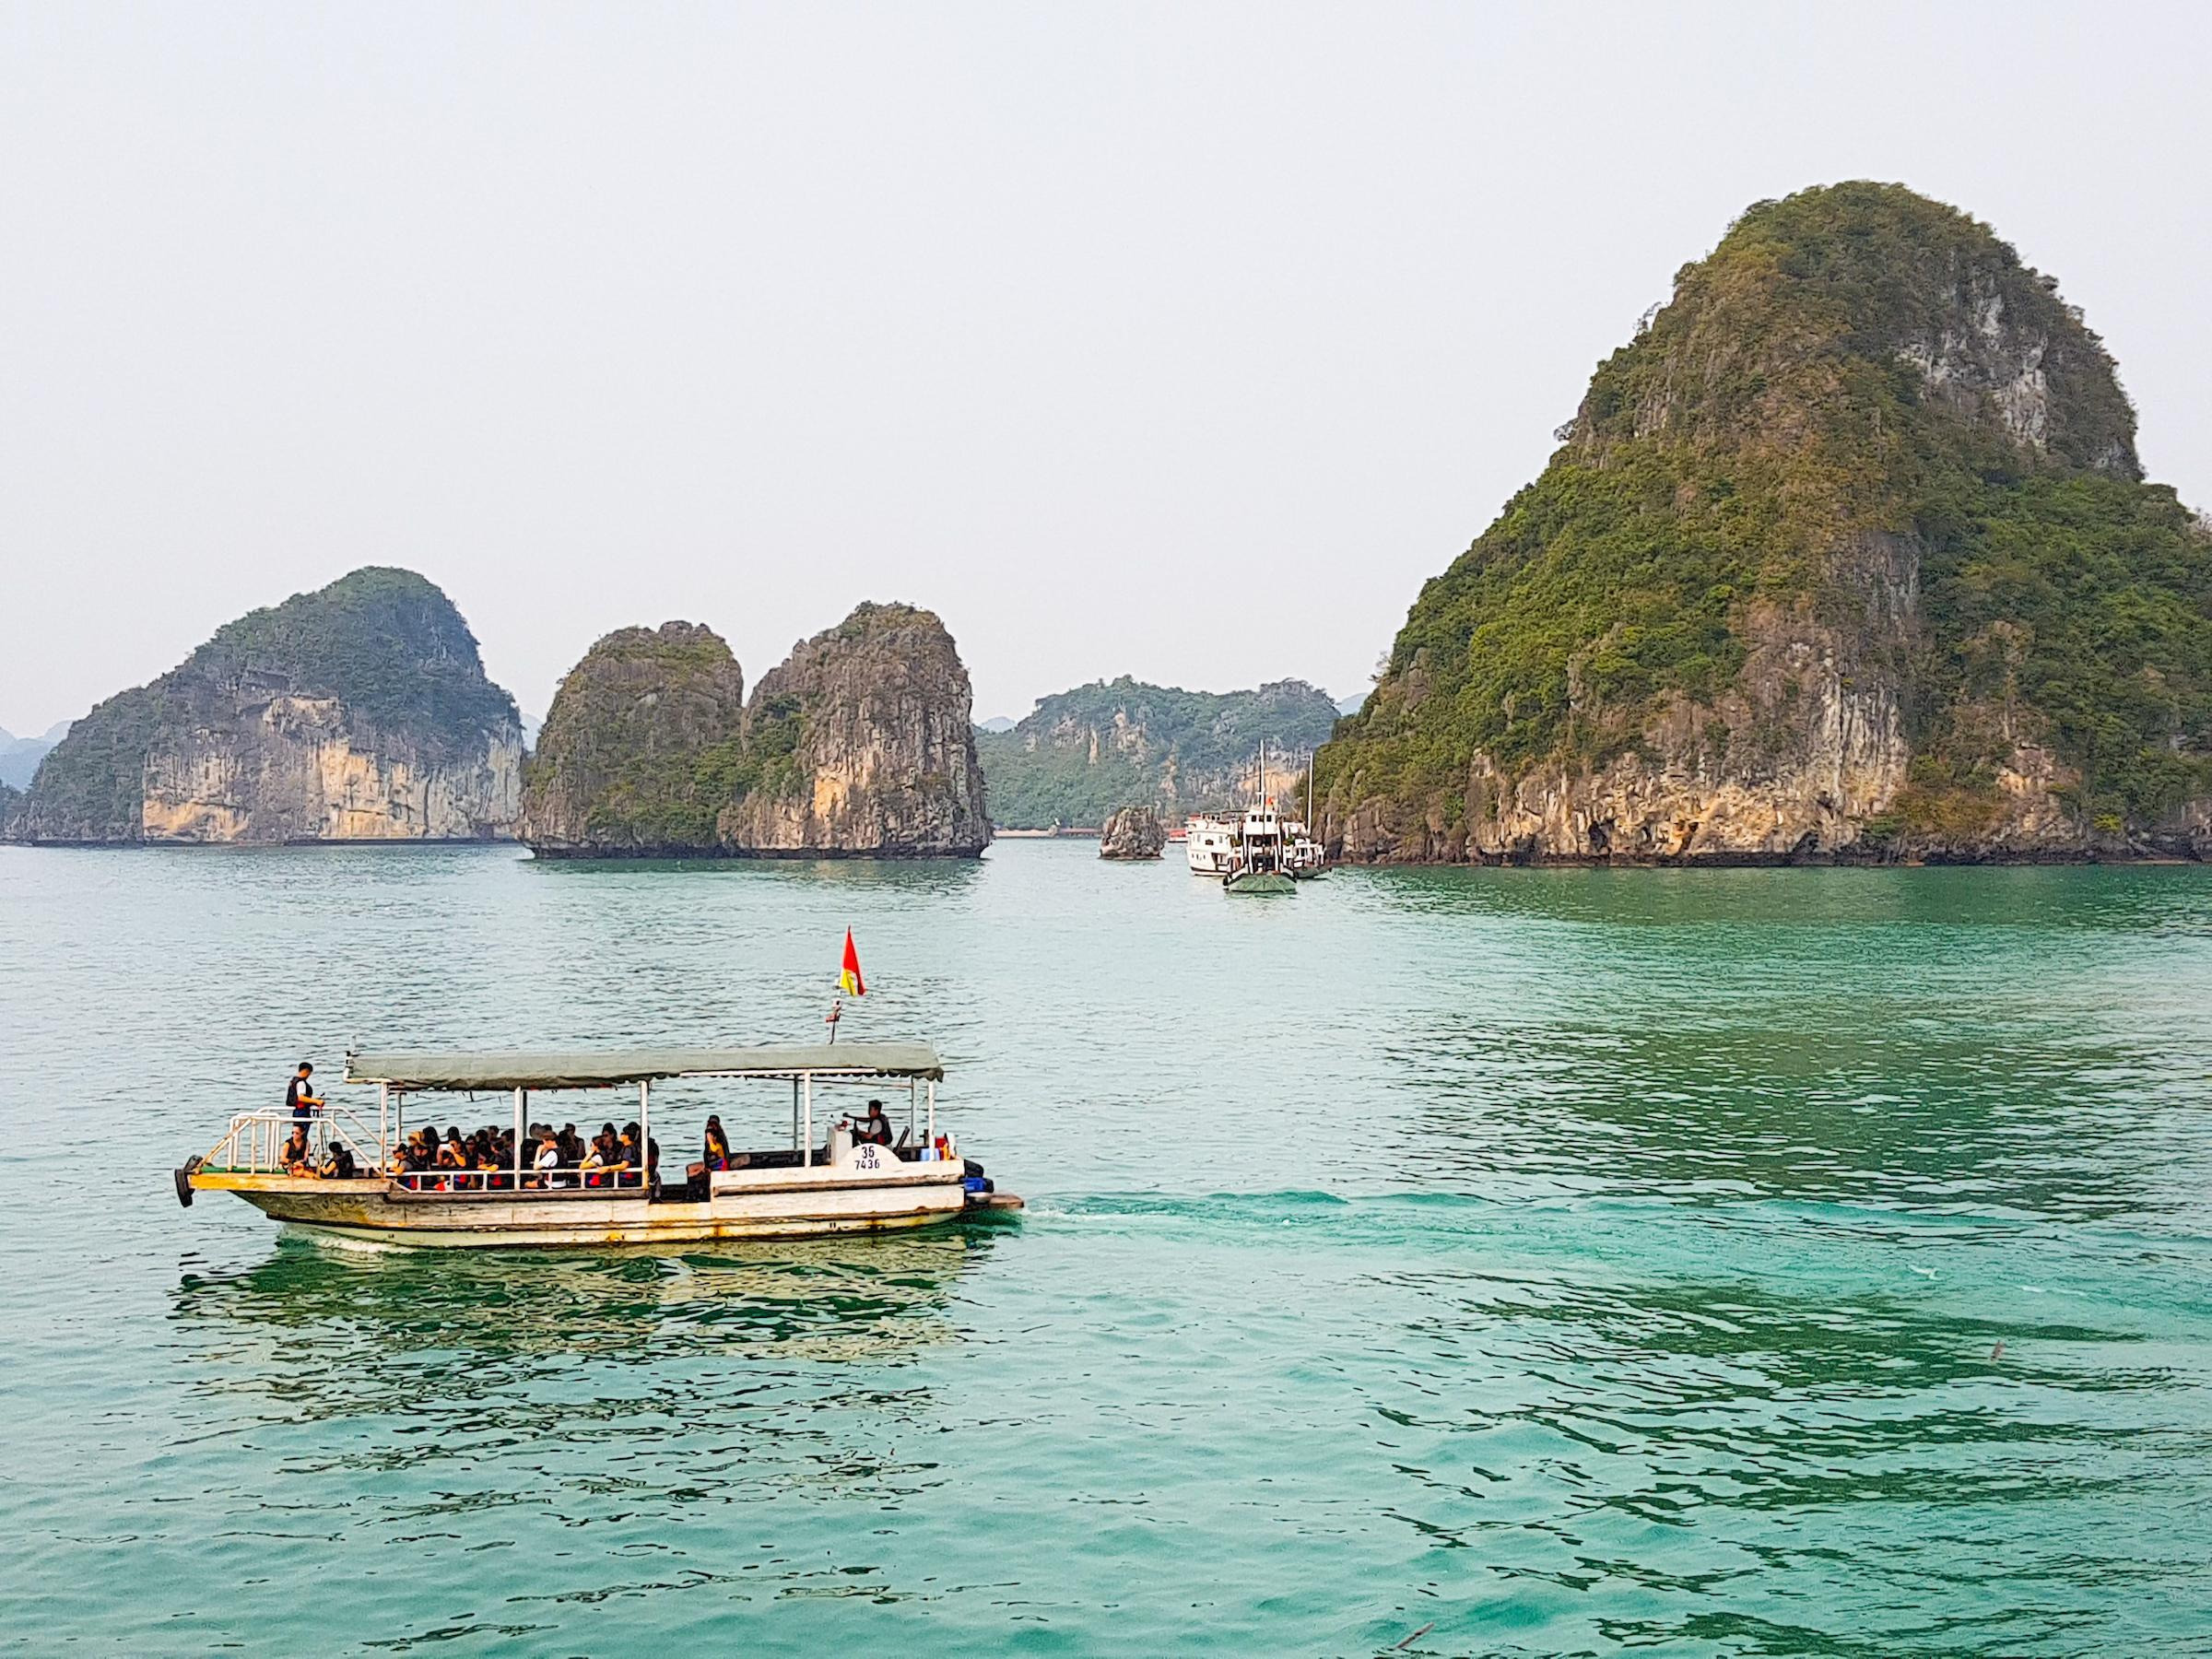 Embark on a journey to one of the most breathtaking destinations in Vietnam